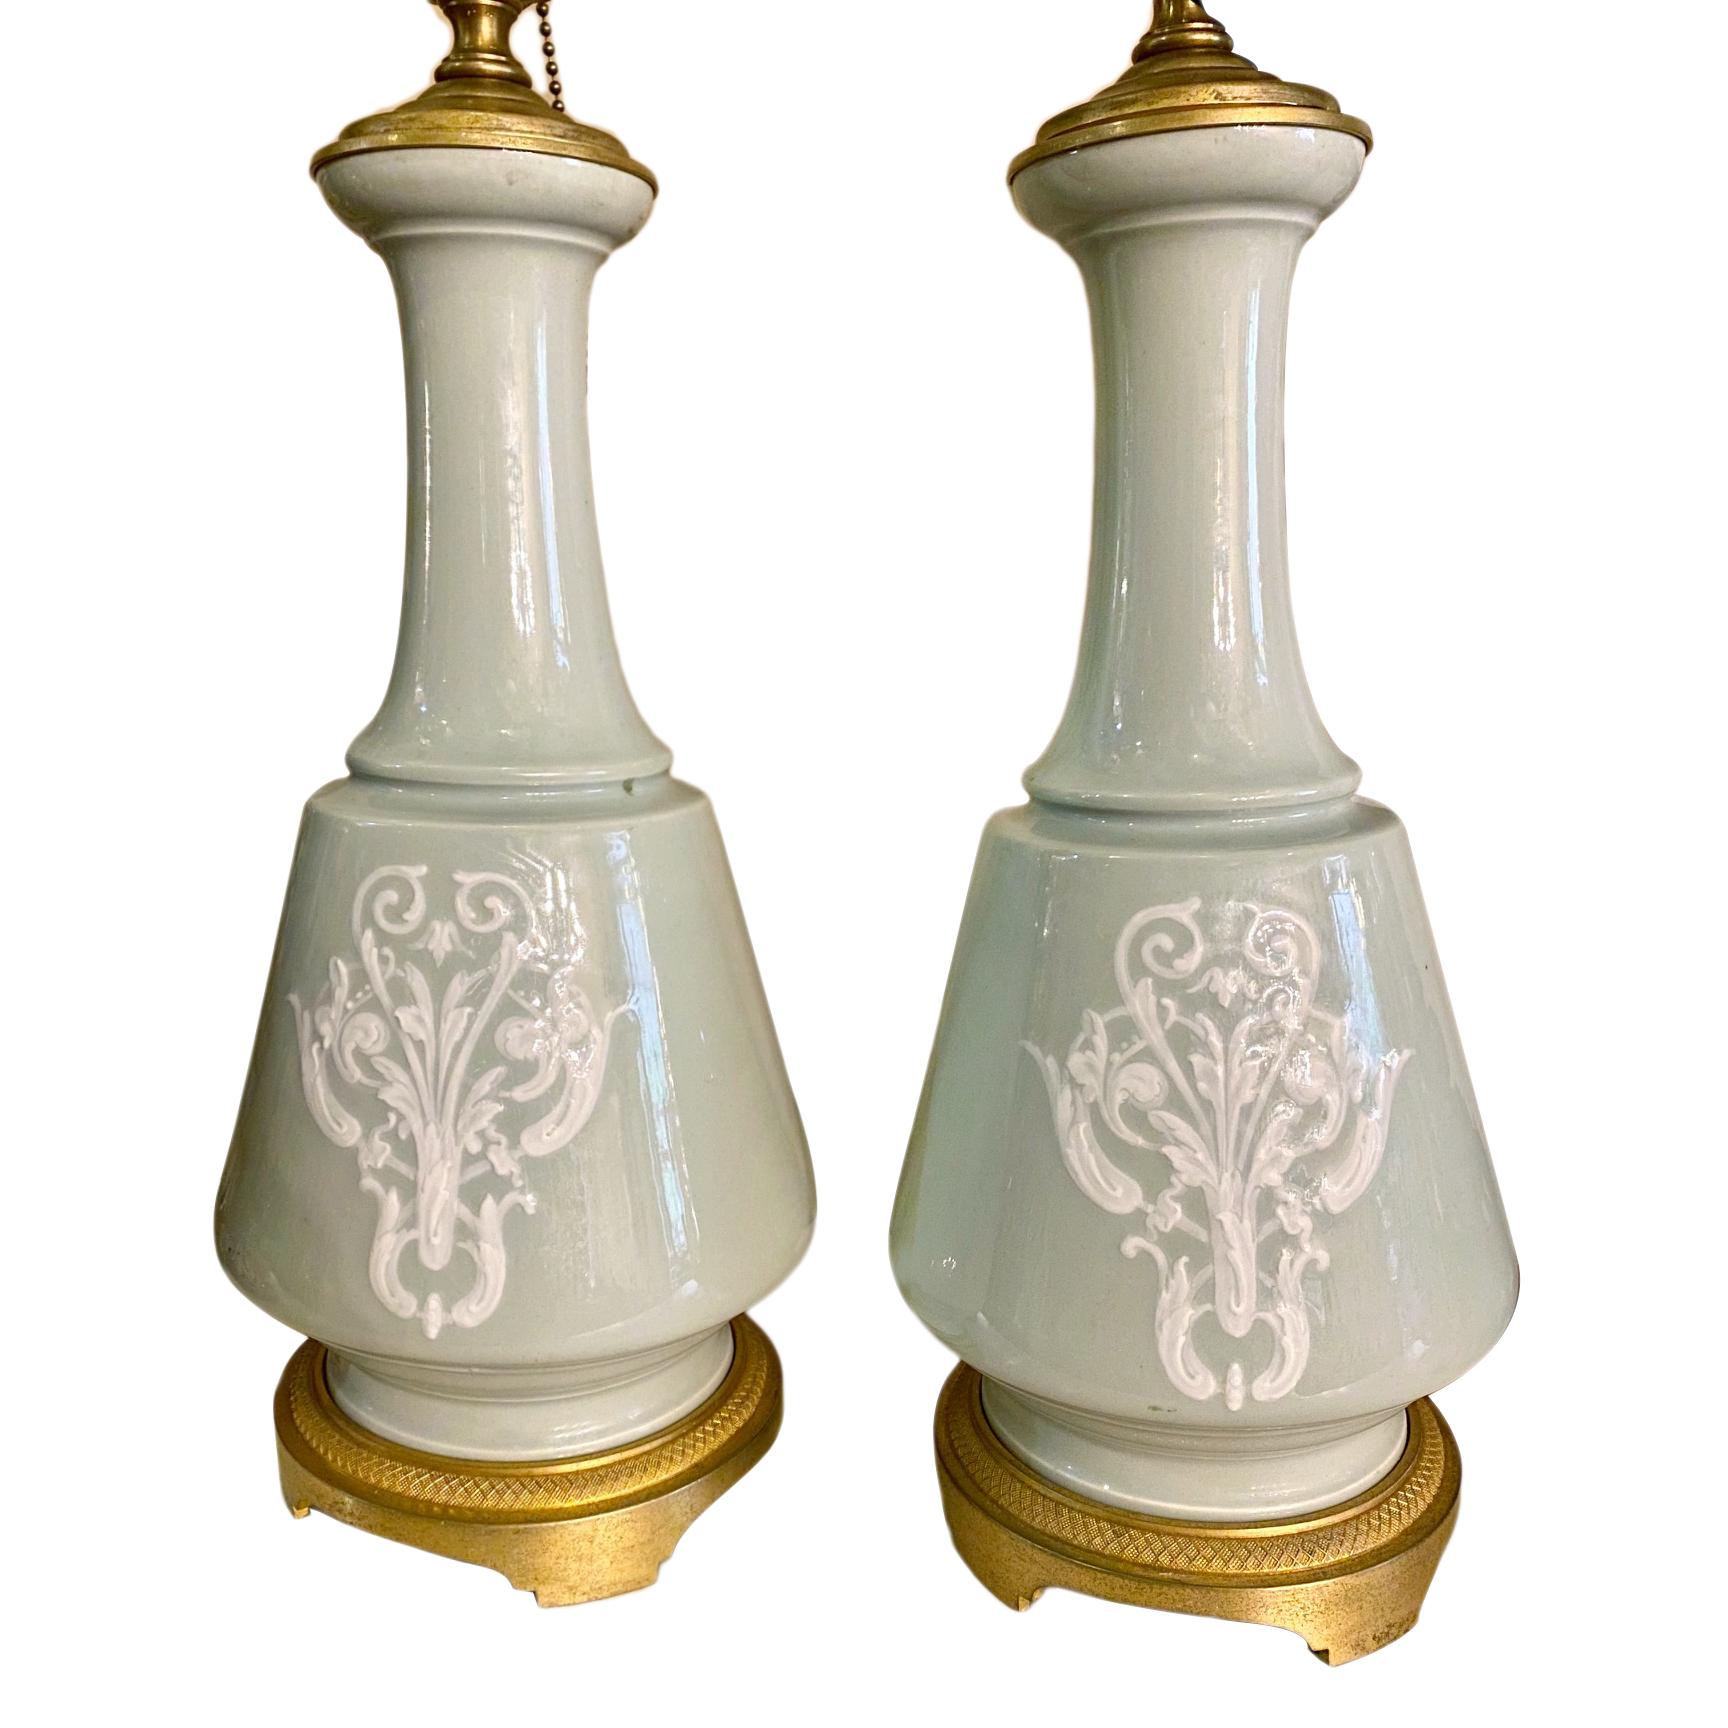 A pair of French circa 1900s celadon table lamps with etched bronze bases.

Measurements:
Height of body: 14